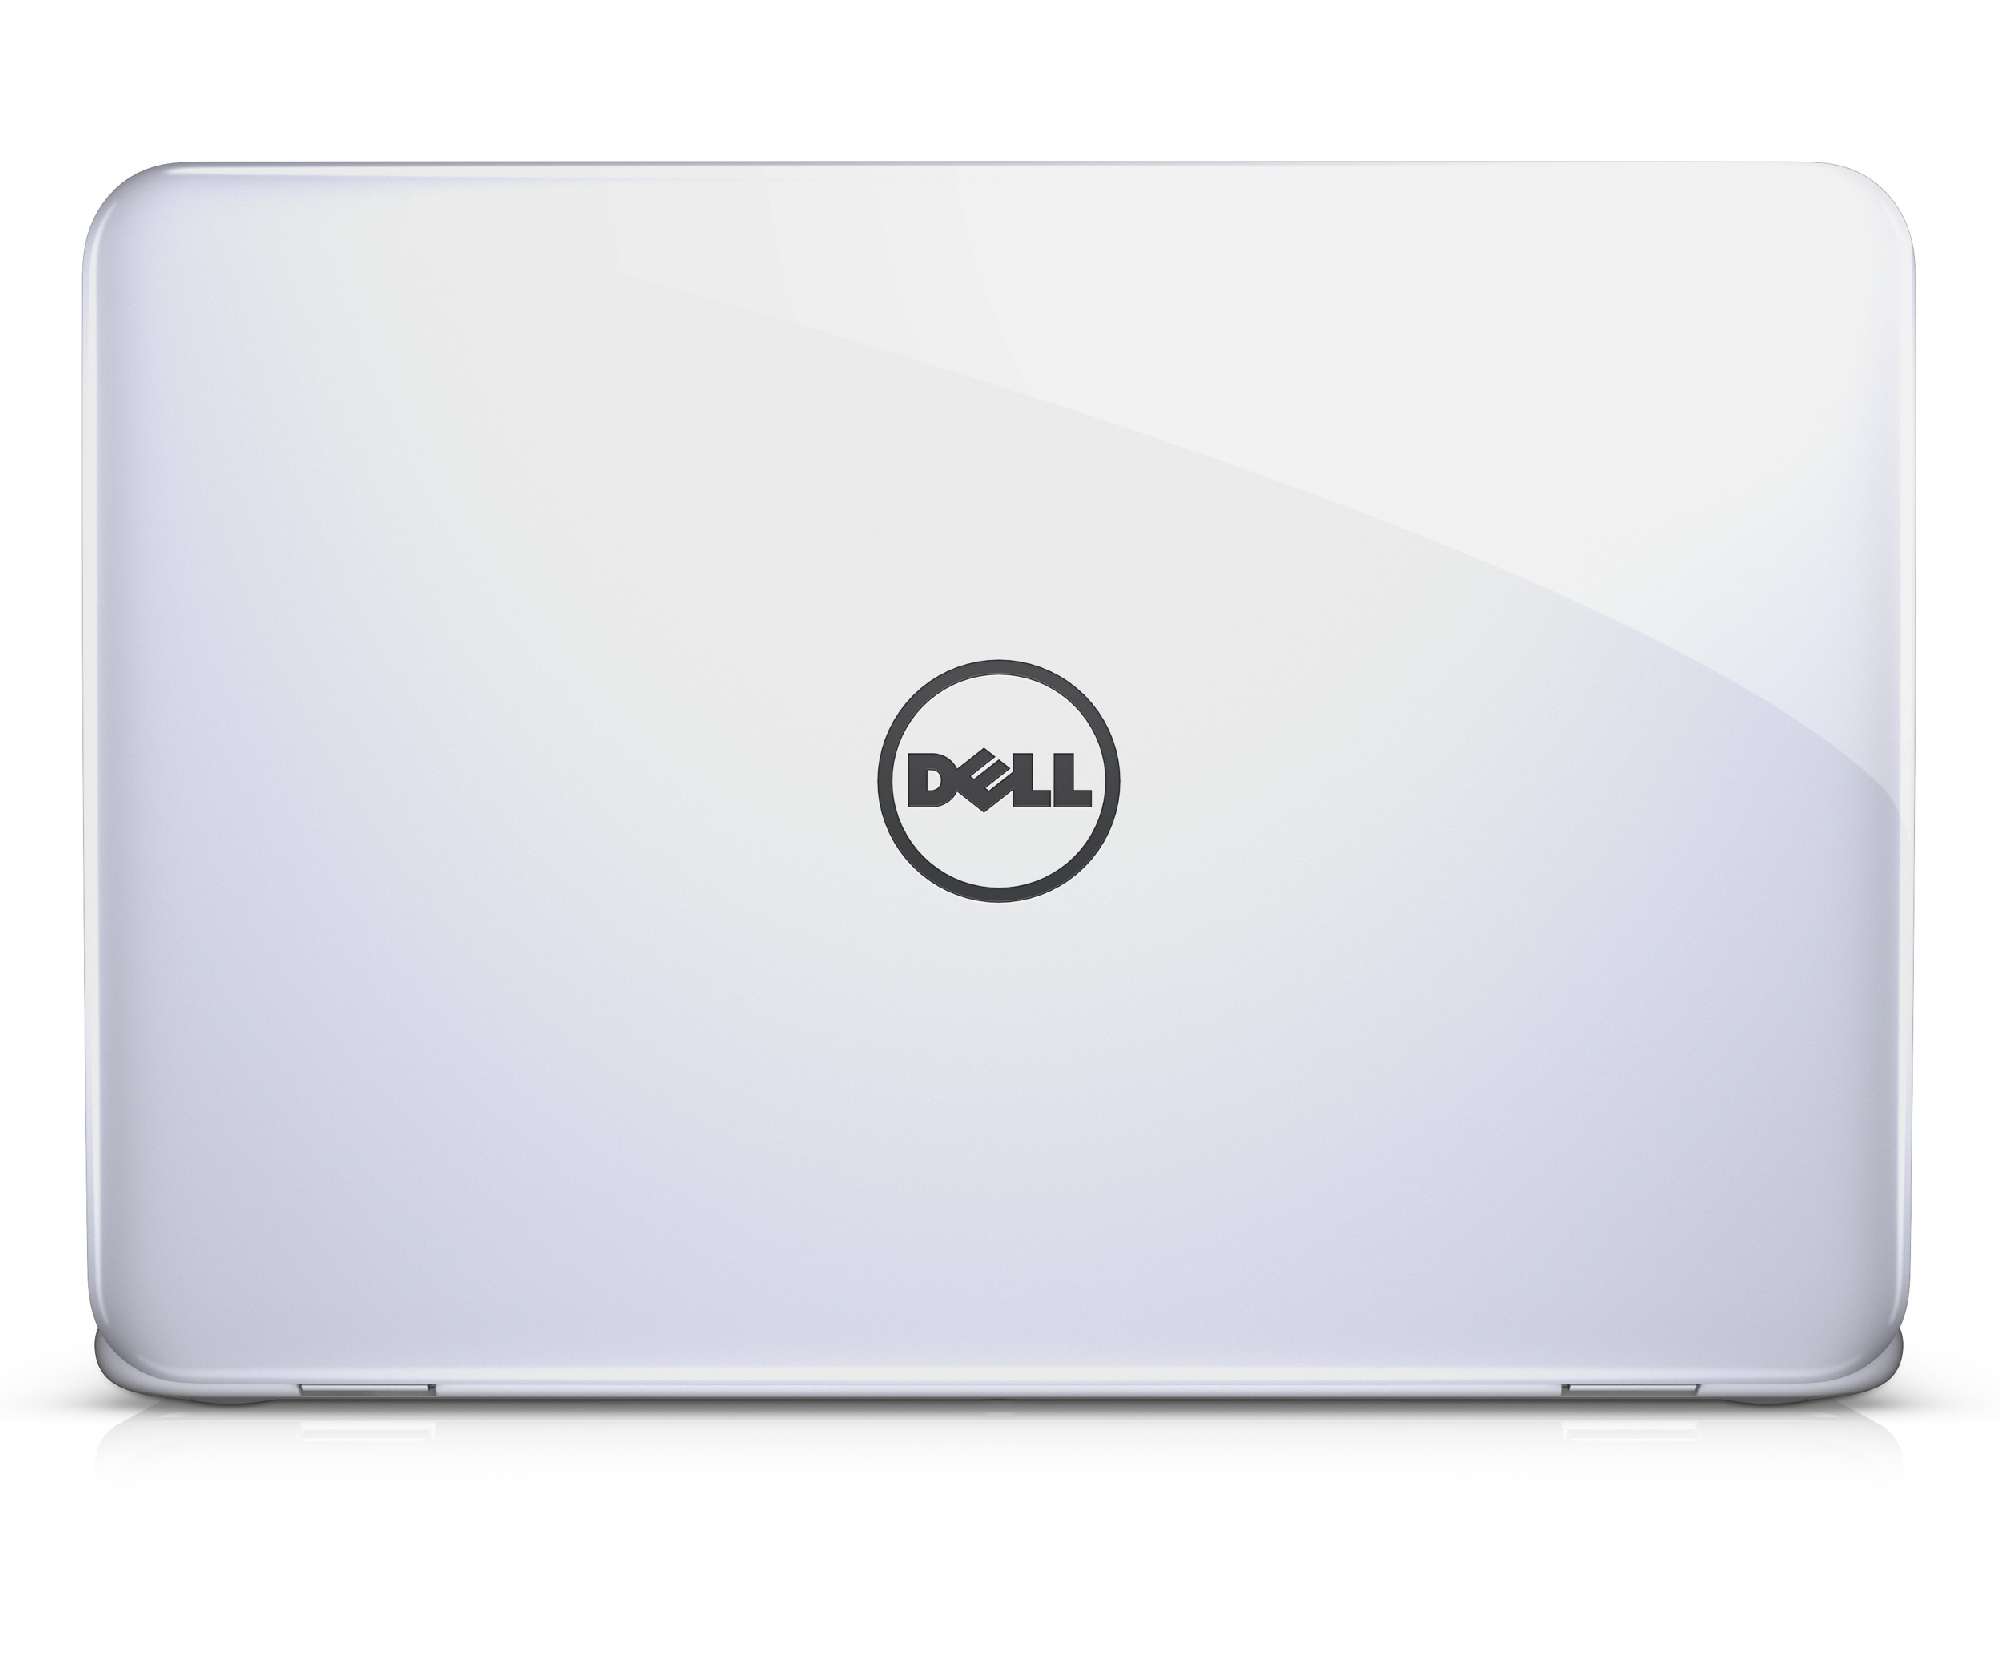 Dell Inspiron 11-3162 P24T | EGL Africa